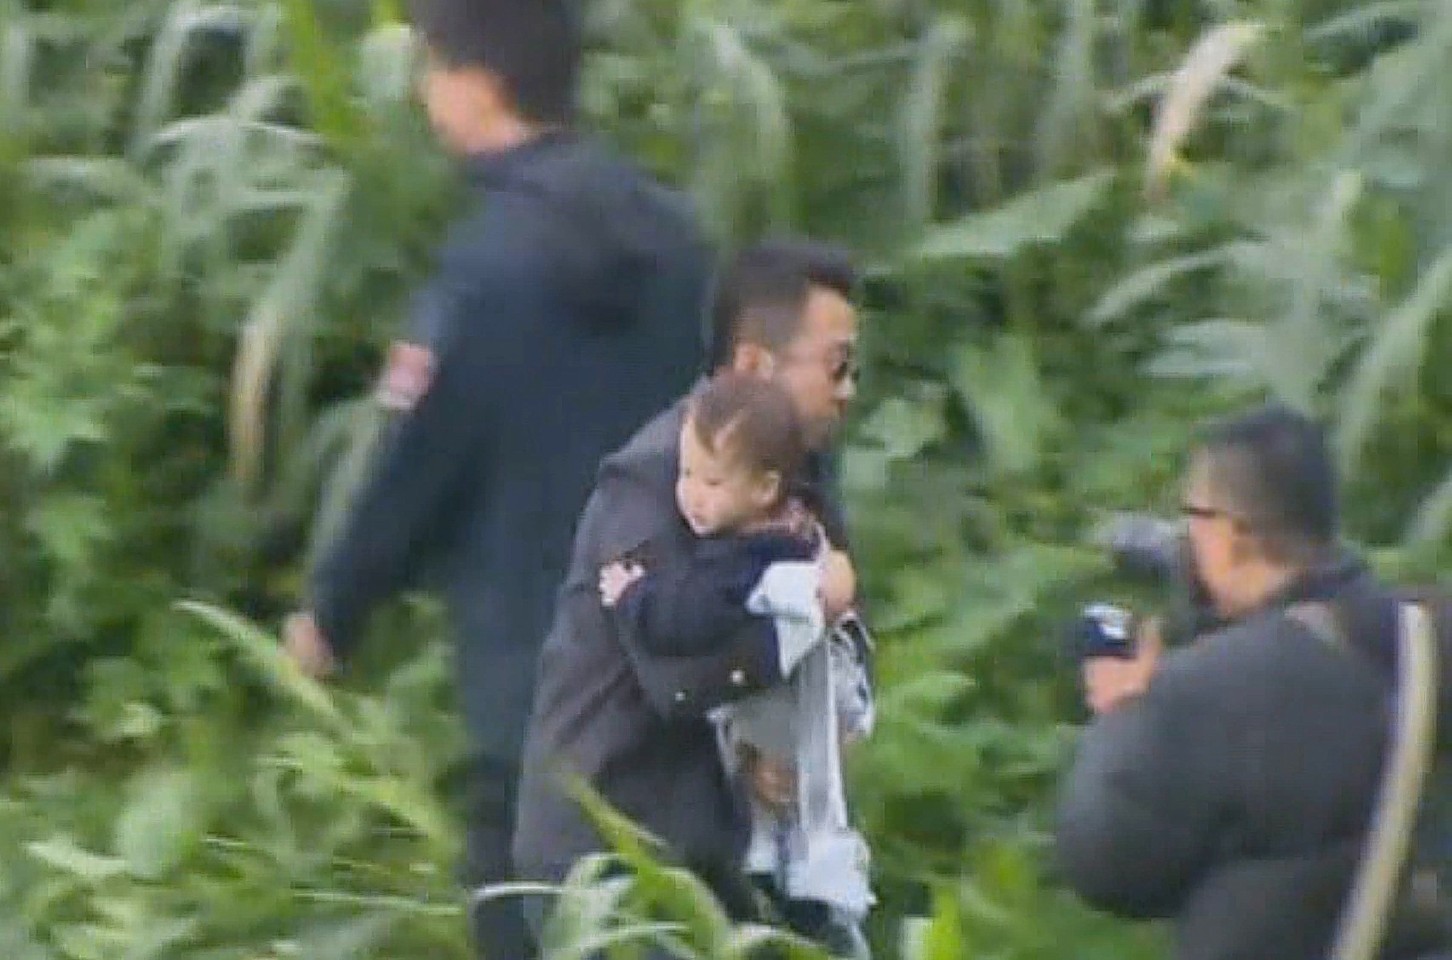 The child is rescued from the plane after it crashed into the river